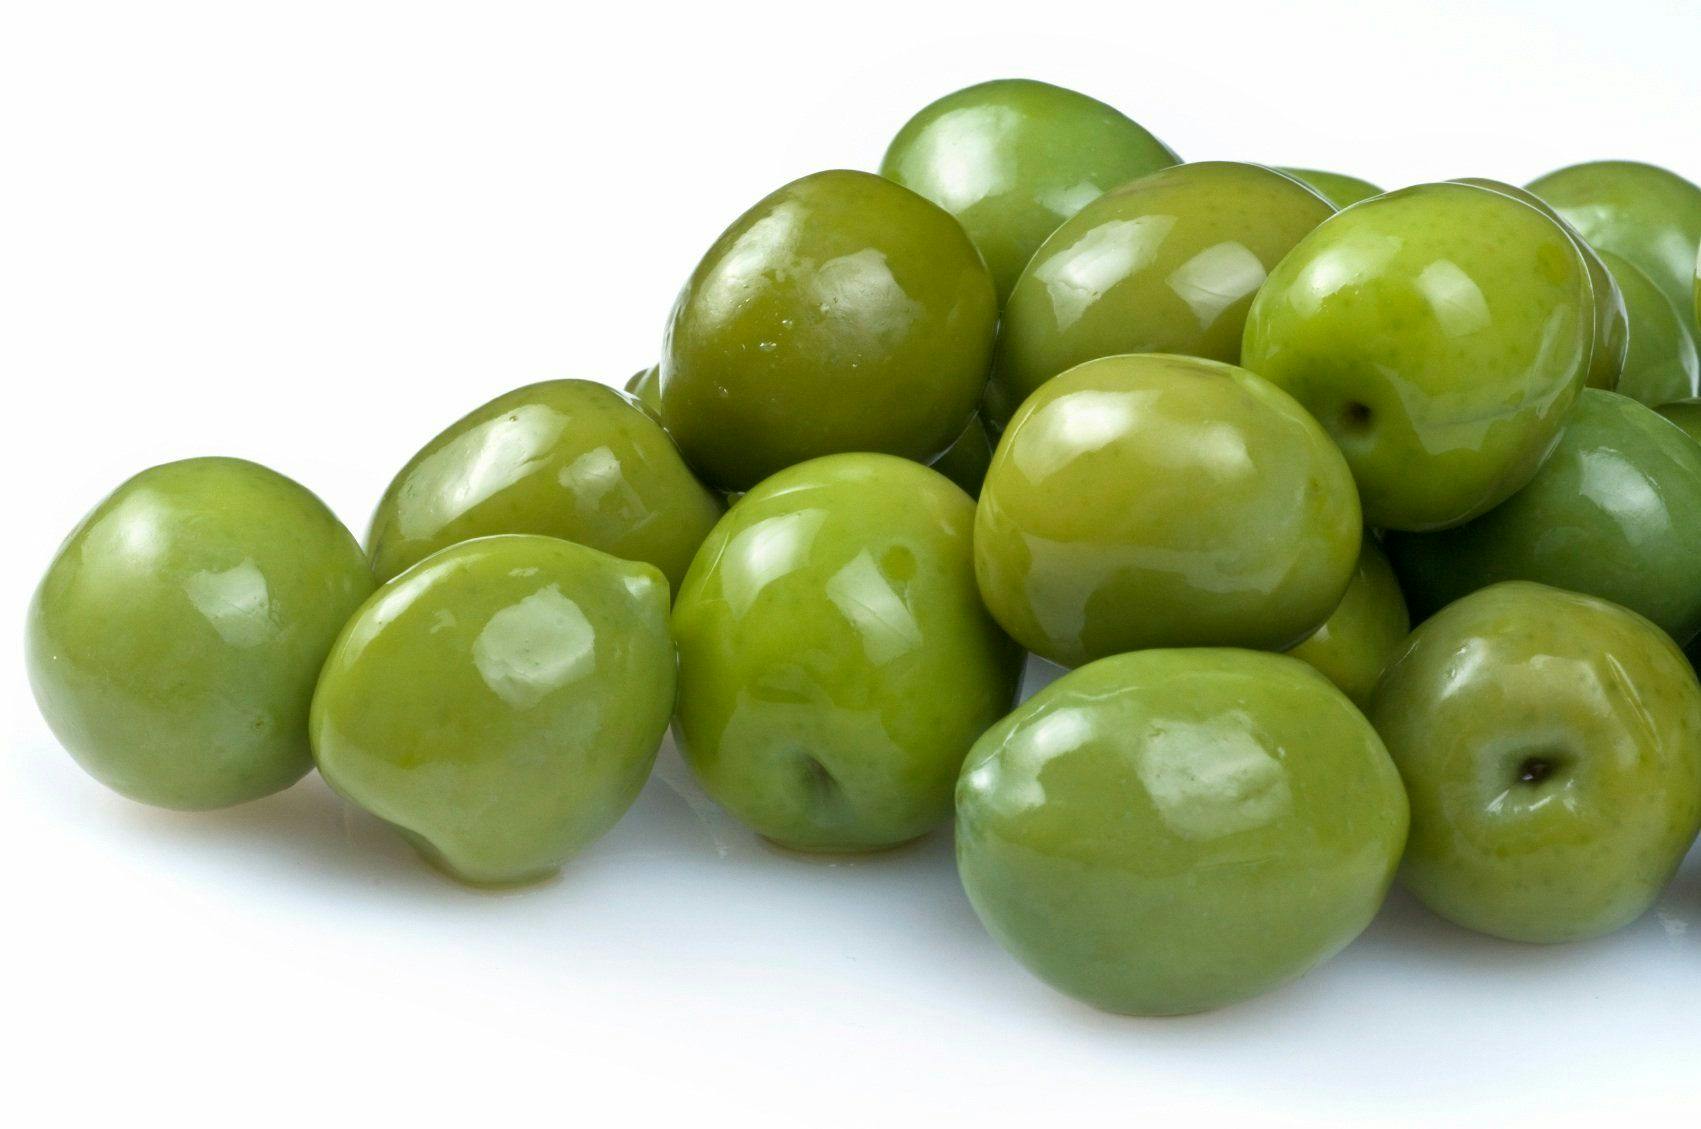 More Patents Link Olive Polyphenols with Reduced Eczema, Psoriasis